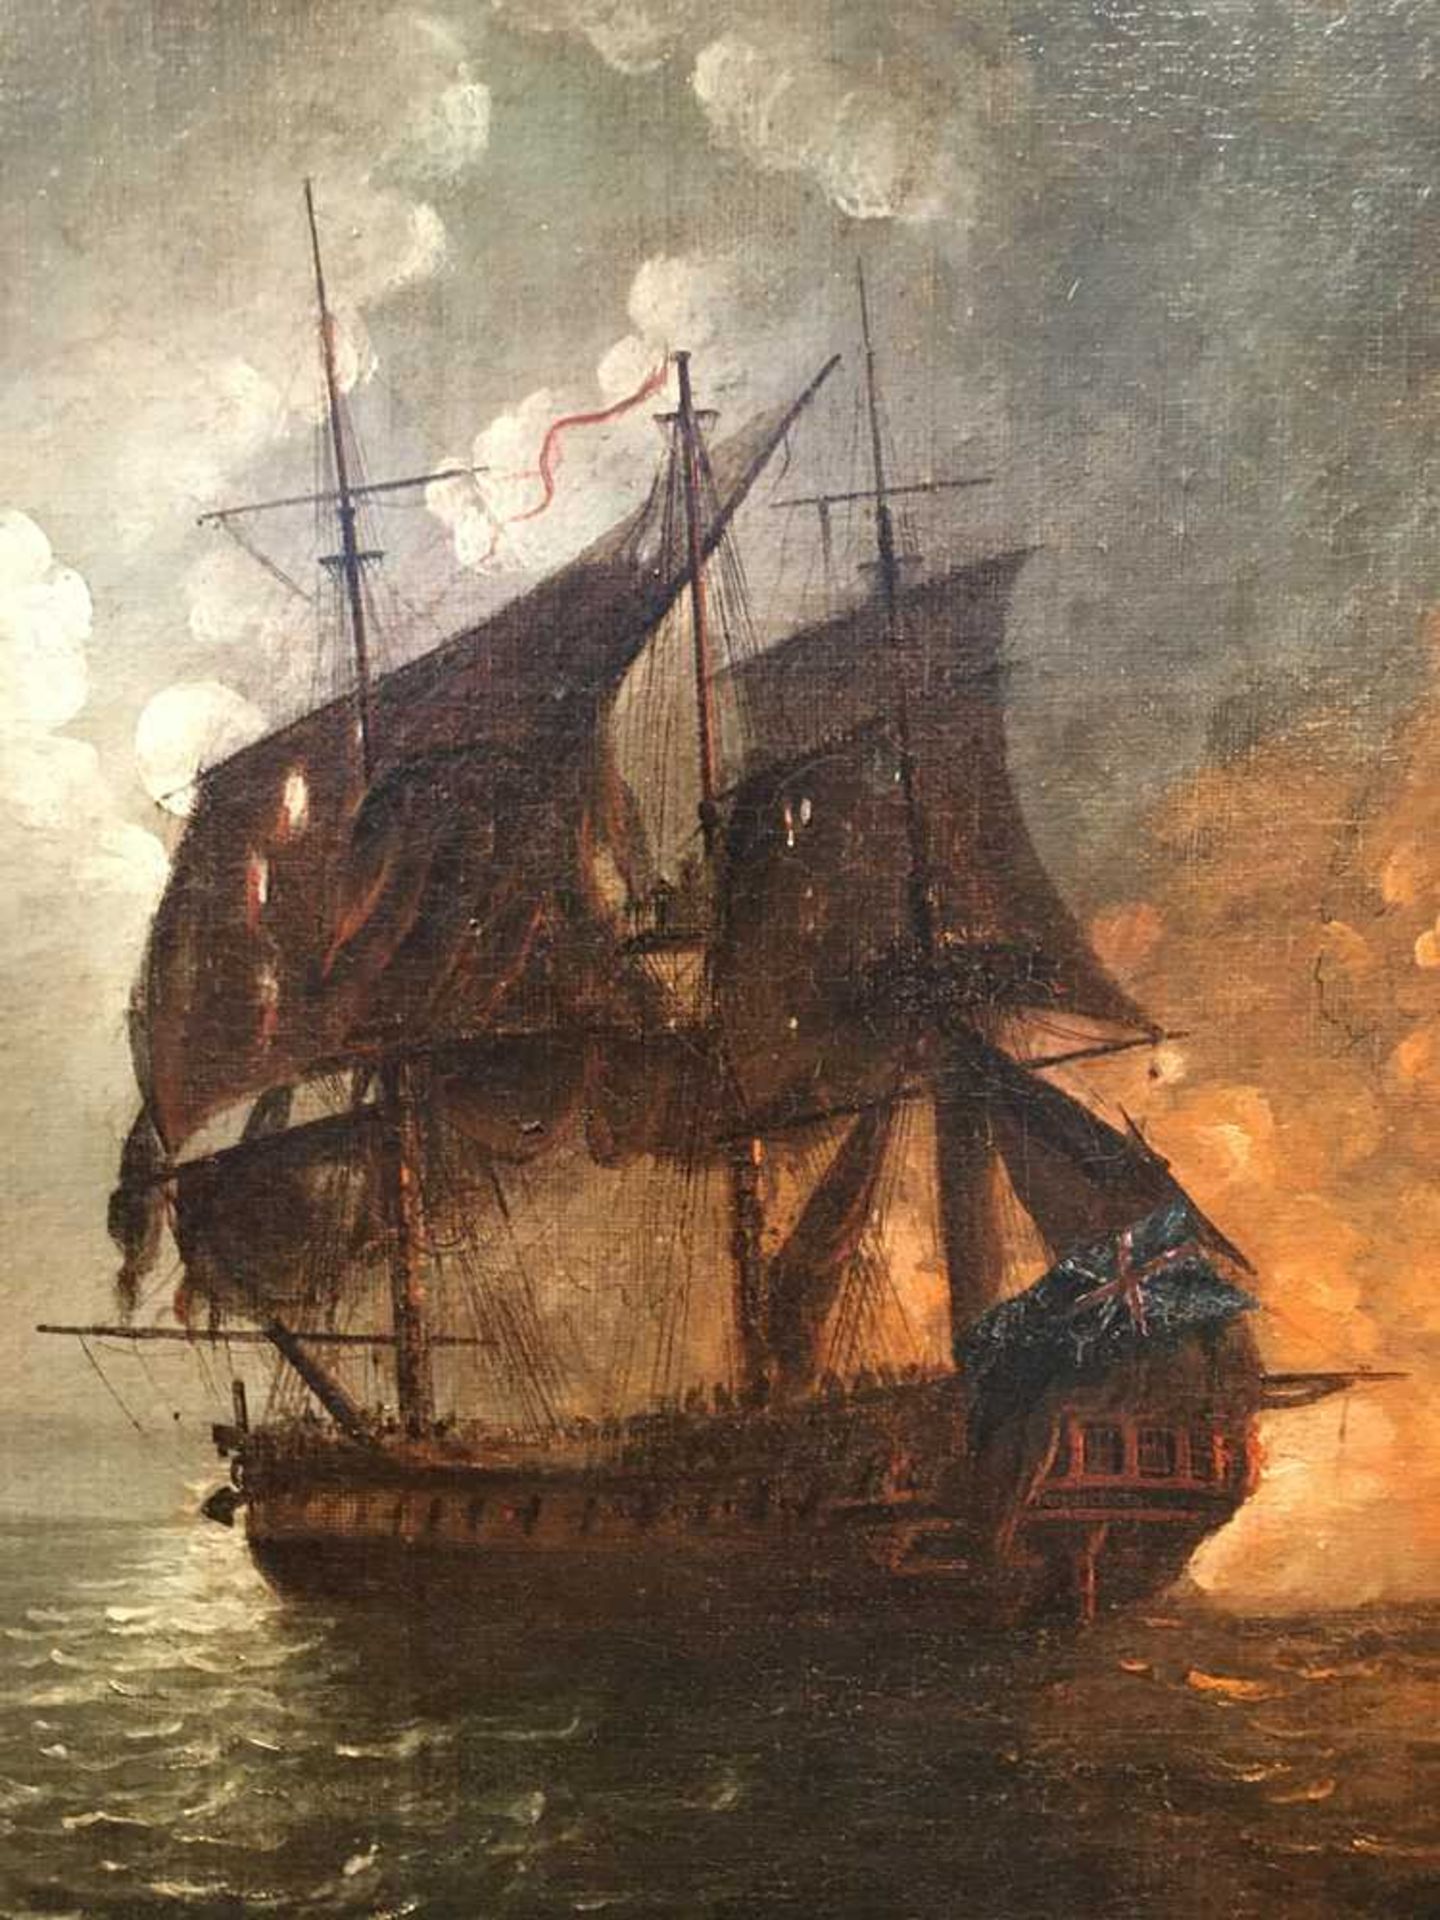 FOLLOWER OF THOMAS LUNY THE MOONLIGHT ENGAGEMENT BETWEEN THE FRIGATE H.M.S. TERPSICAE AND LA VESTIAL - Image 11 of 23